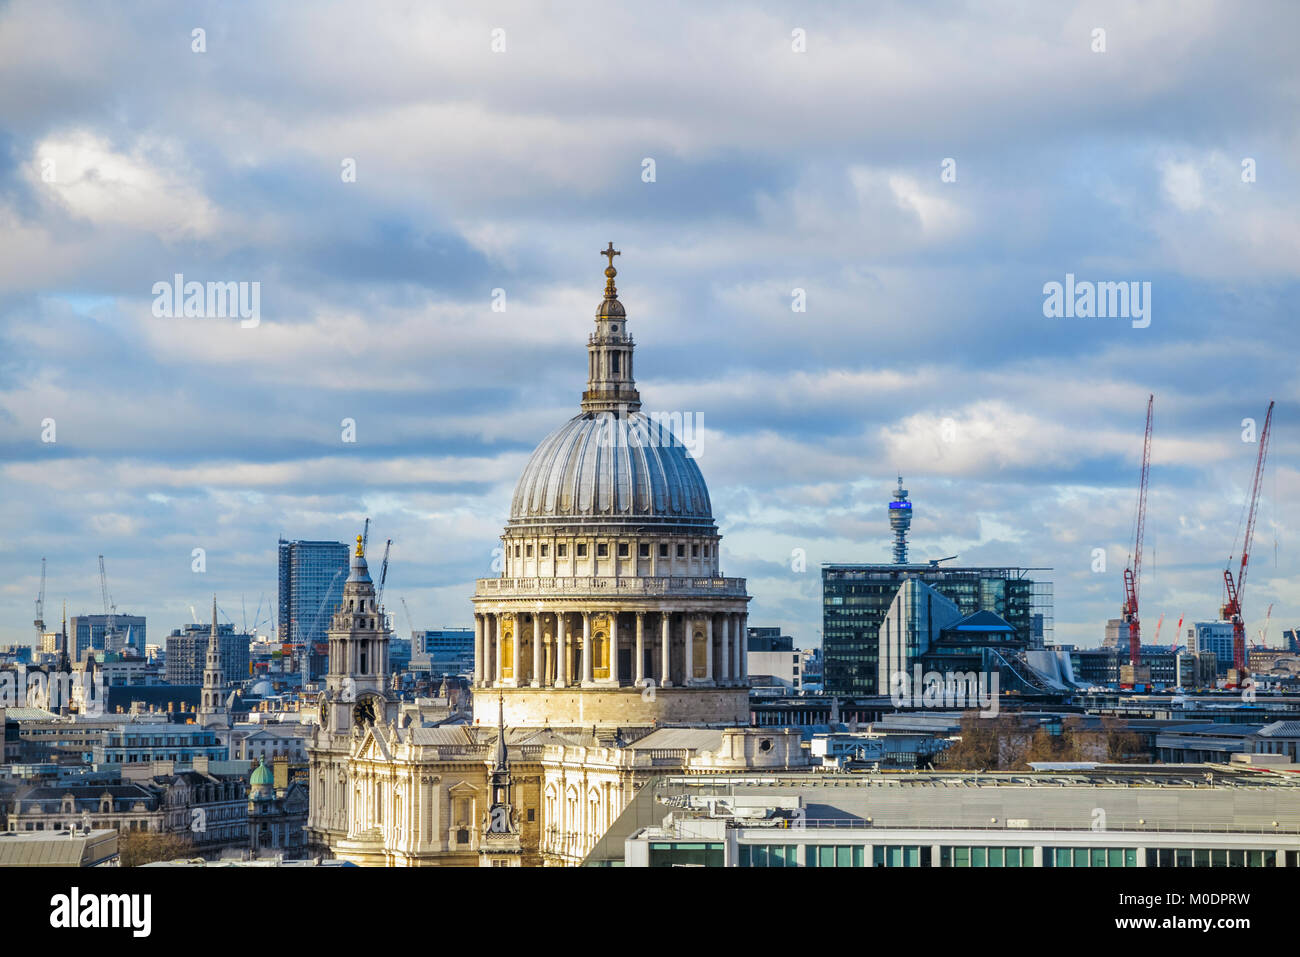 The iconic dome of Sir Christopher Wren's St Paul's Cathedral on London's skyline in winter light, City of London, England, UK Stock Photo